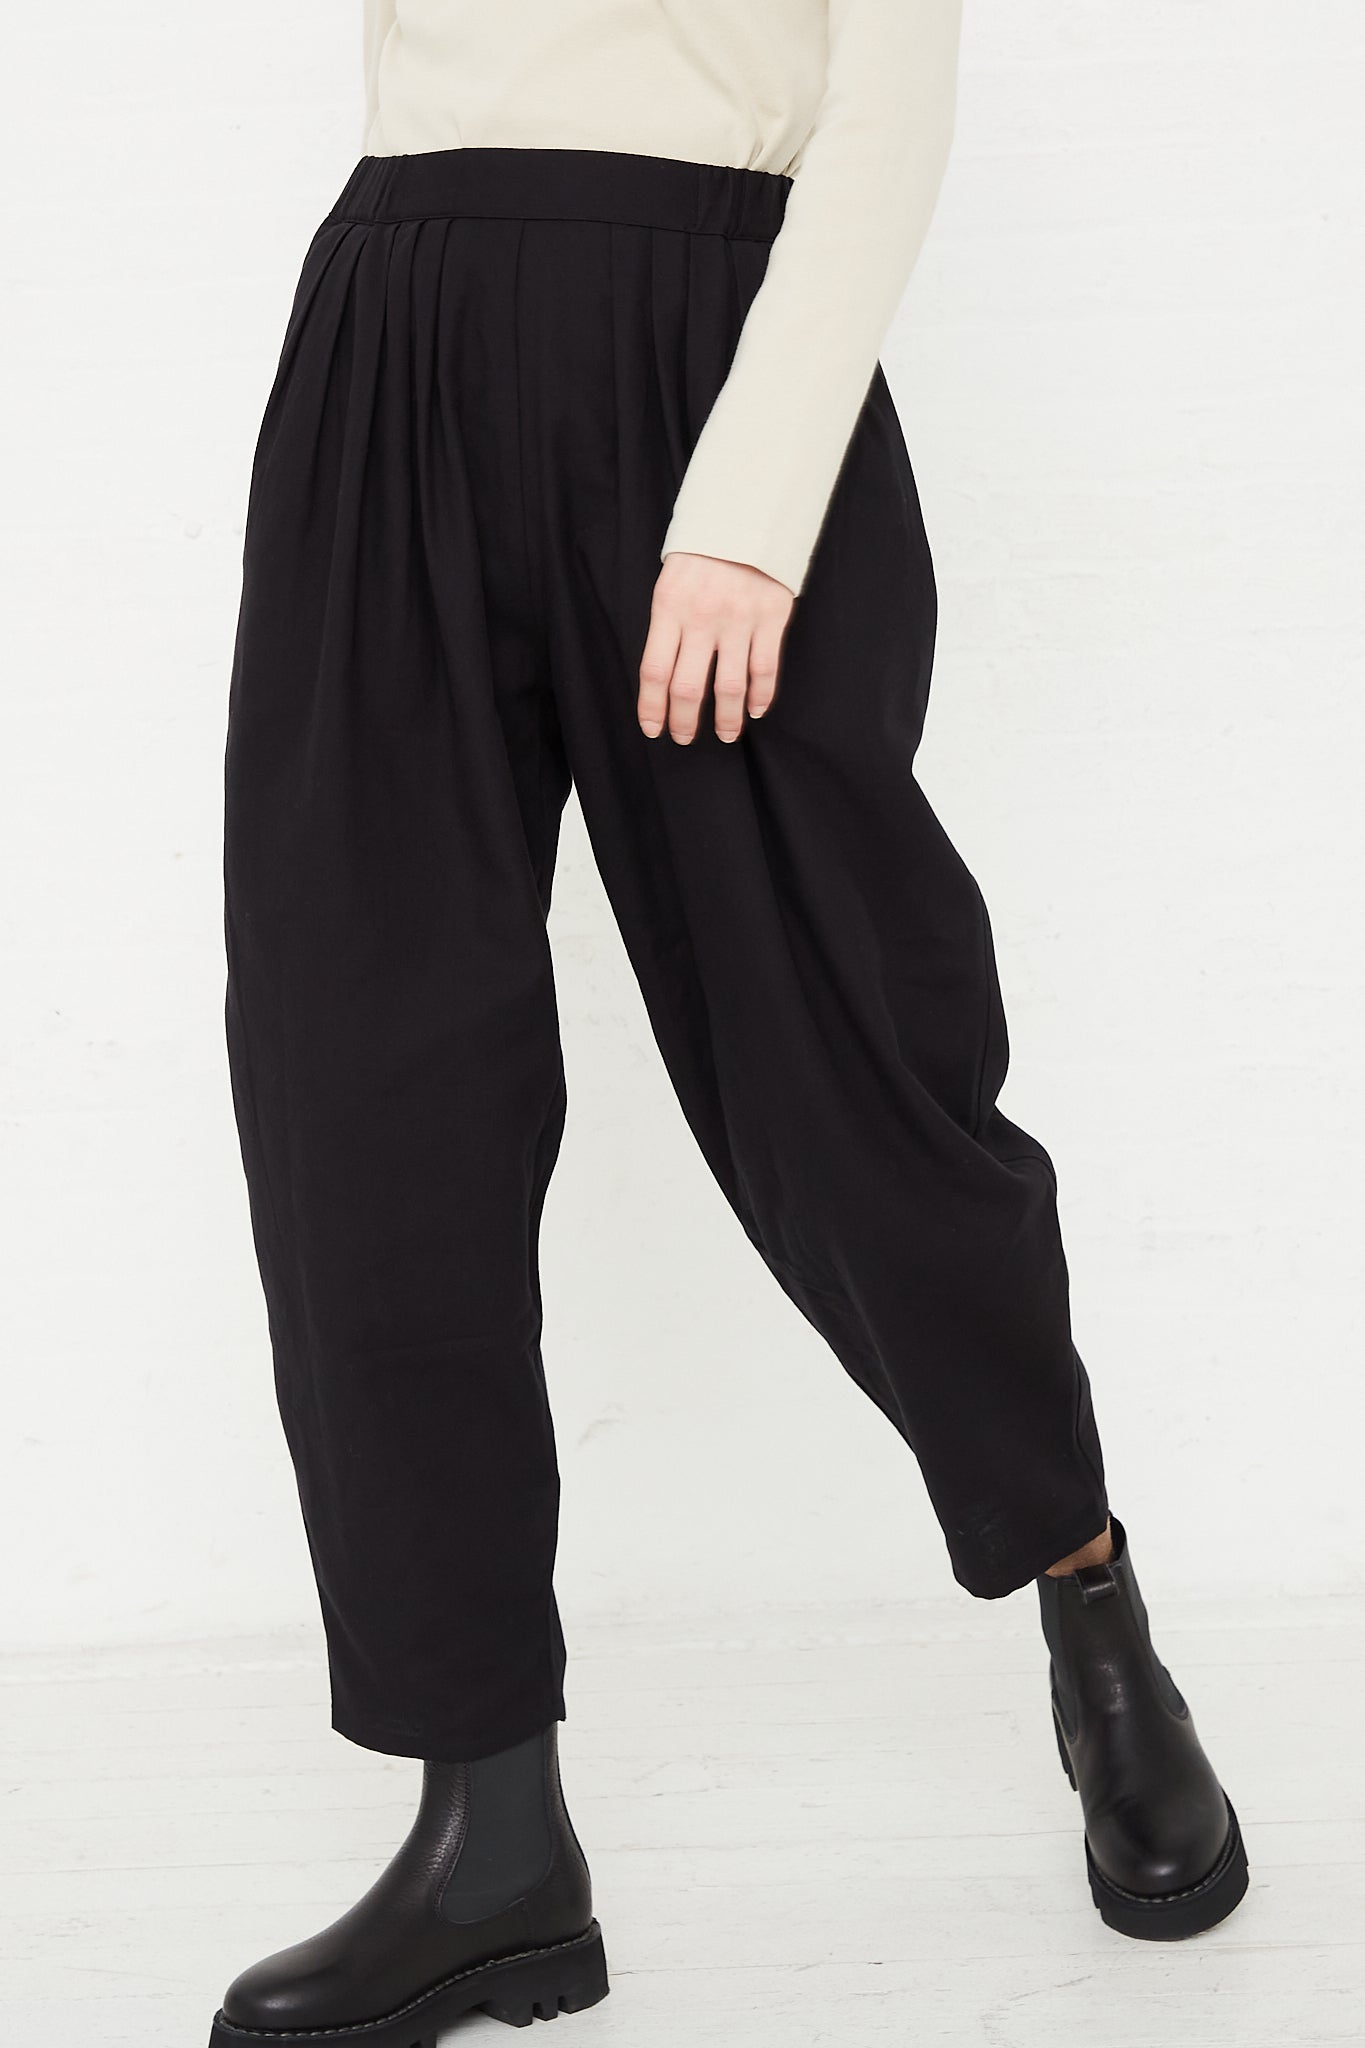 Cotton Twill Draped Pants in Black by Black Crane for Oroboro Front Bottom